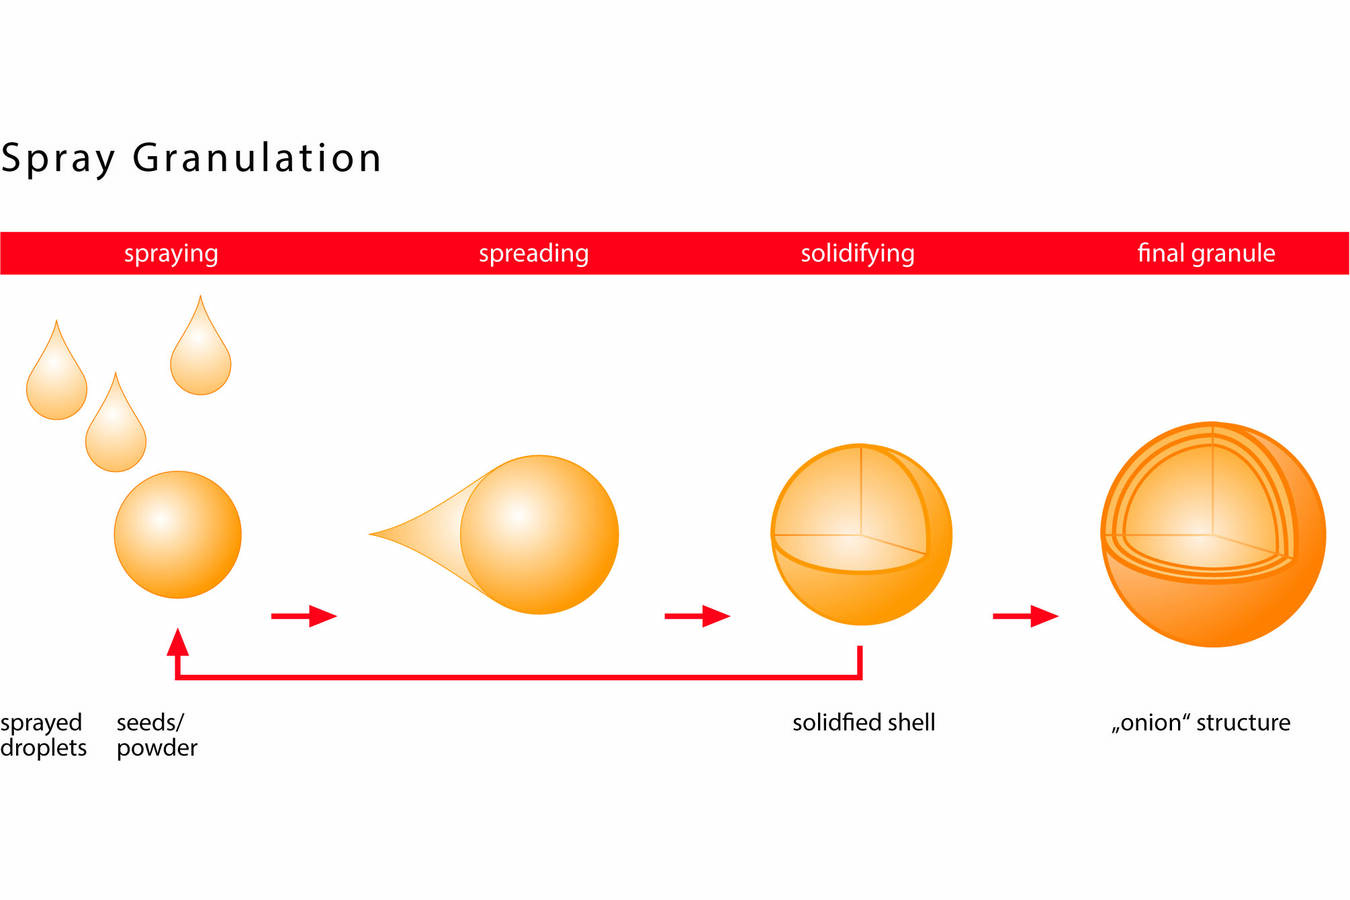 Figure 2: Structure principle spray granulation – drying from inside to outside